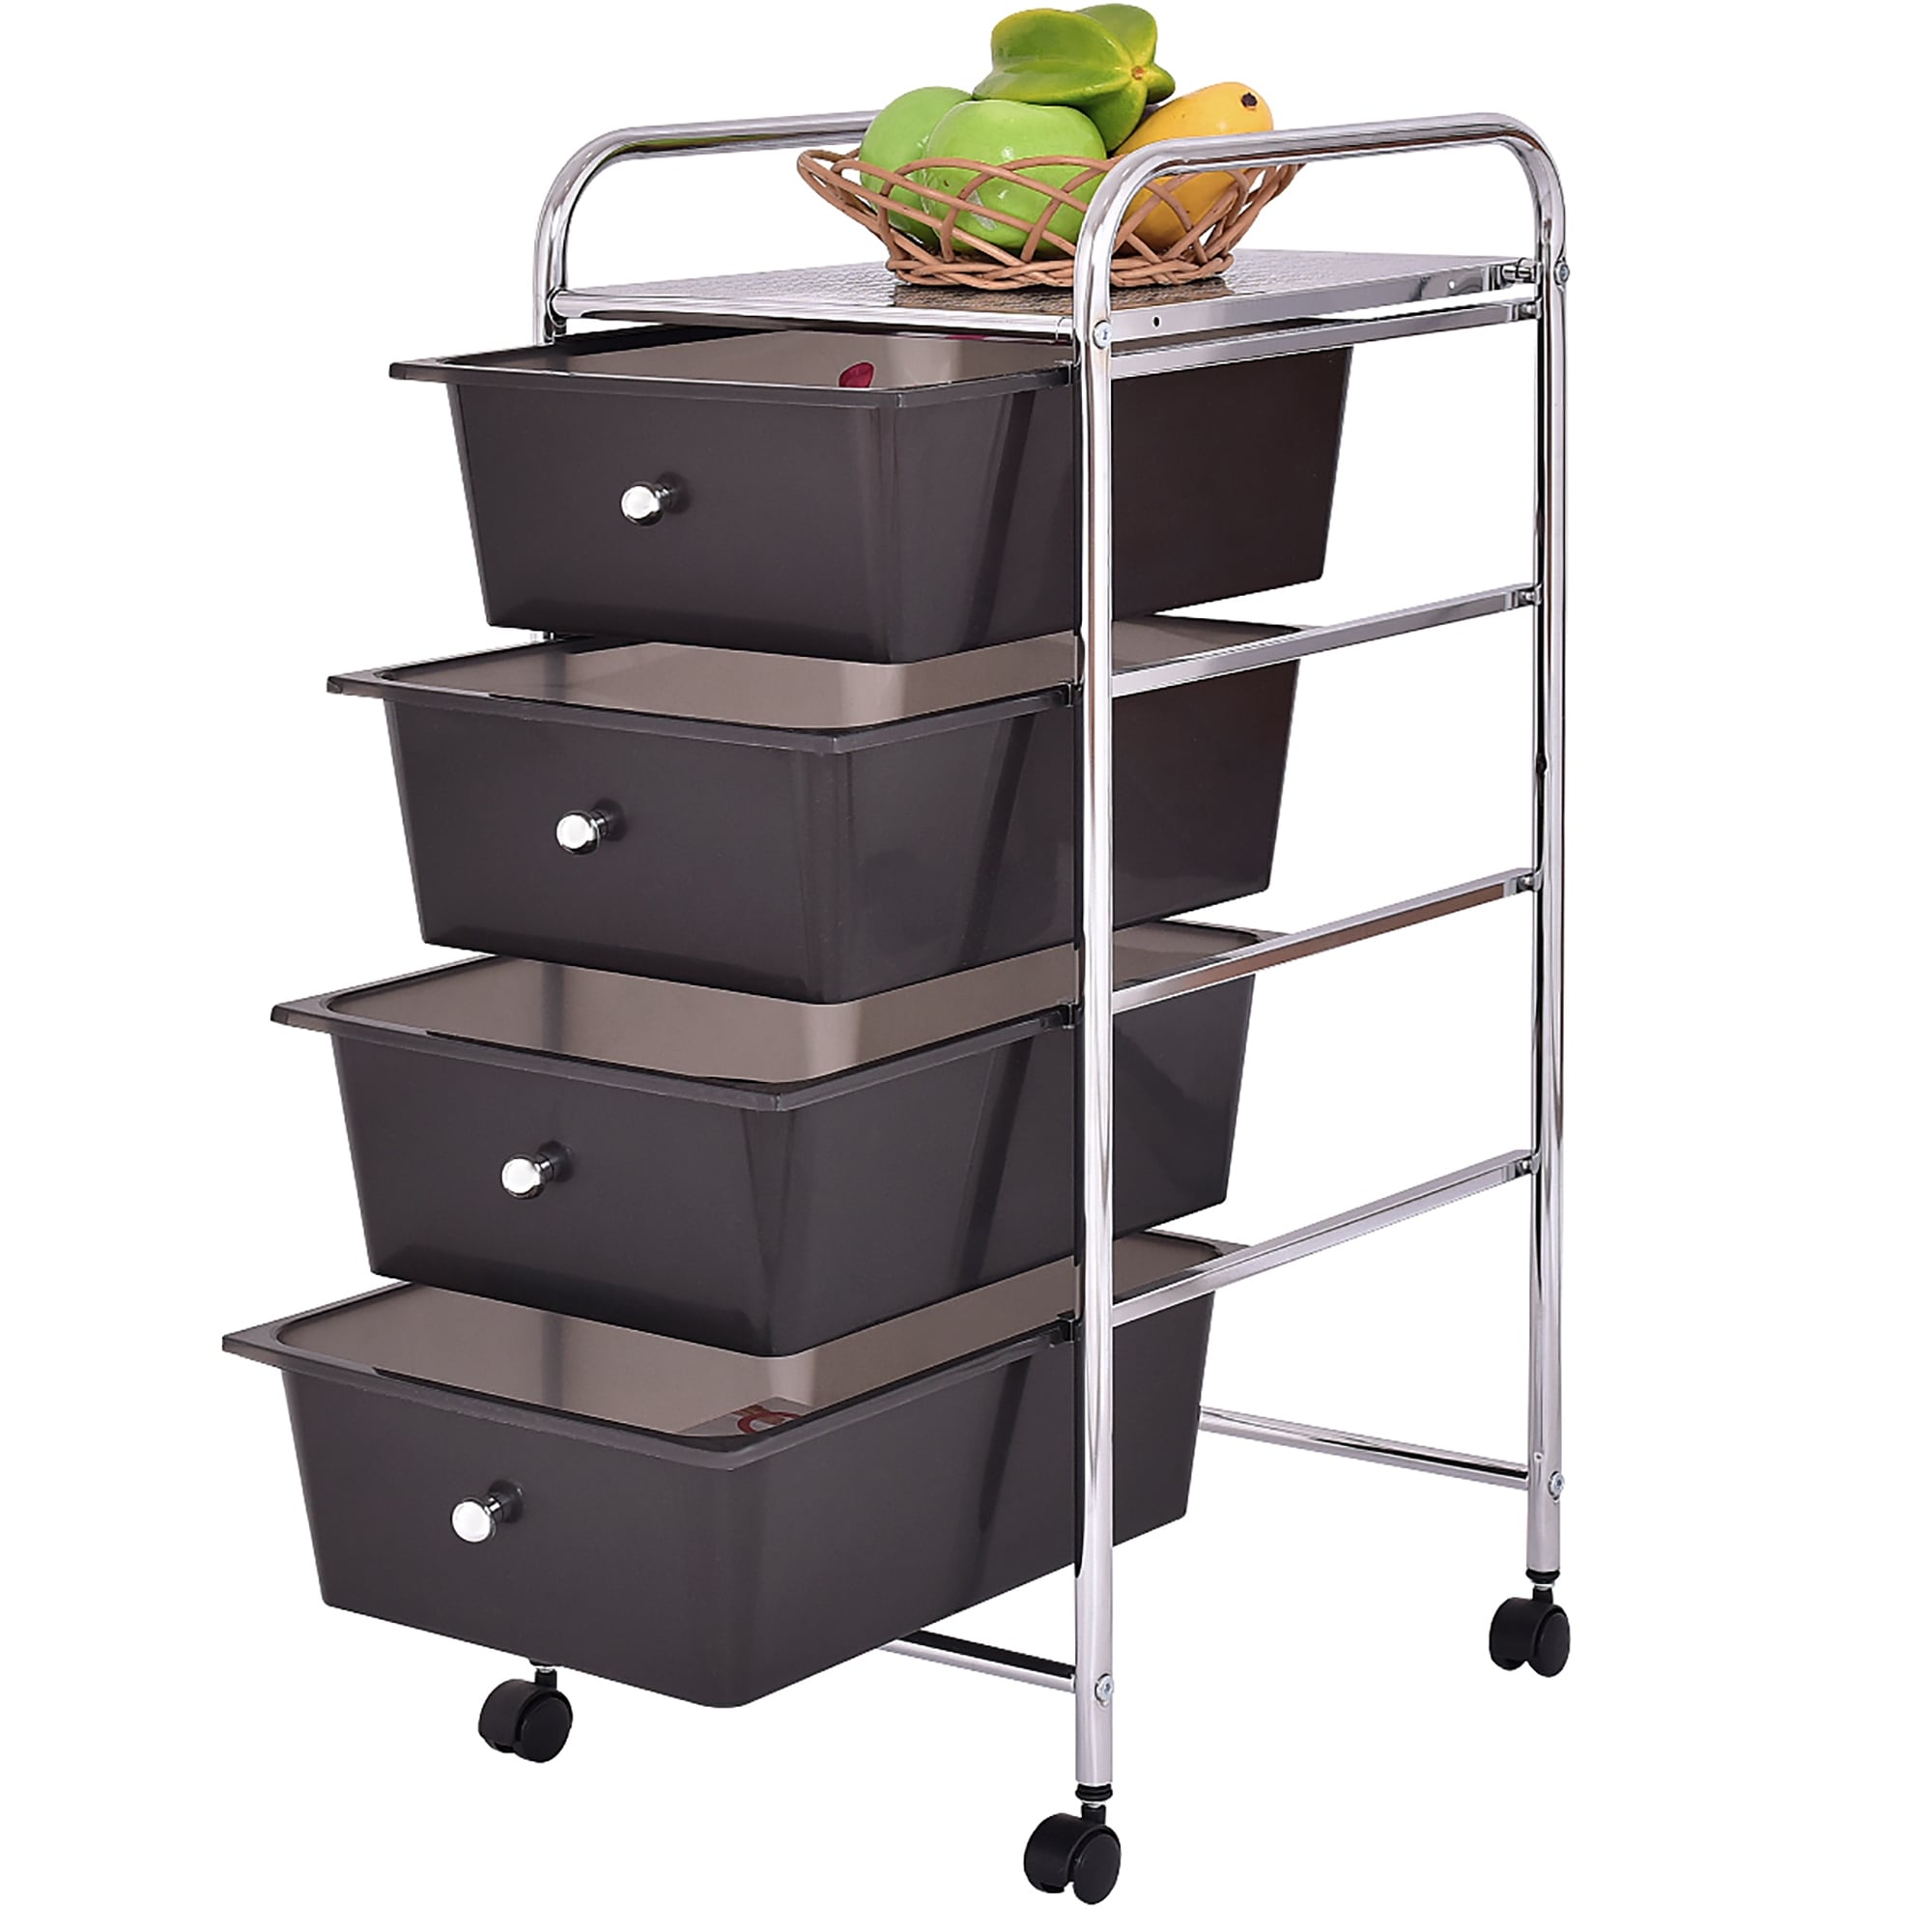 https://ak1.ostkcdn.com/images/products/is/images/direct/c33808e27c19355ab10d036019f0aaccbde6a8cd/4-Drawers-Cart-Storage-Bin-Organizer-Rolling-Storage-Cart.jpg